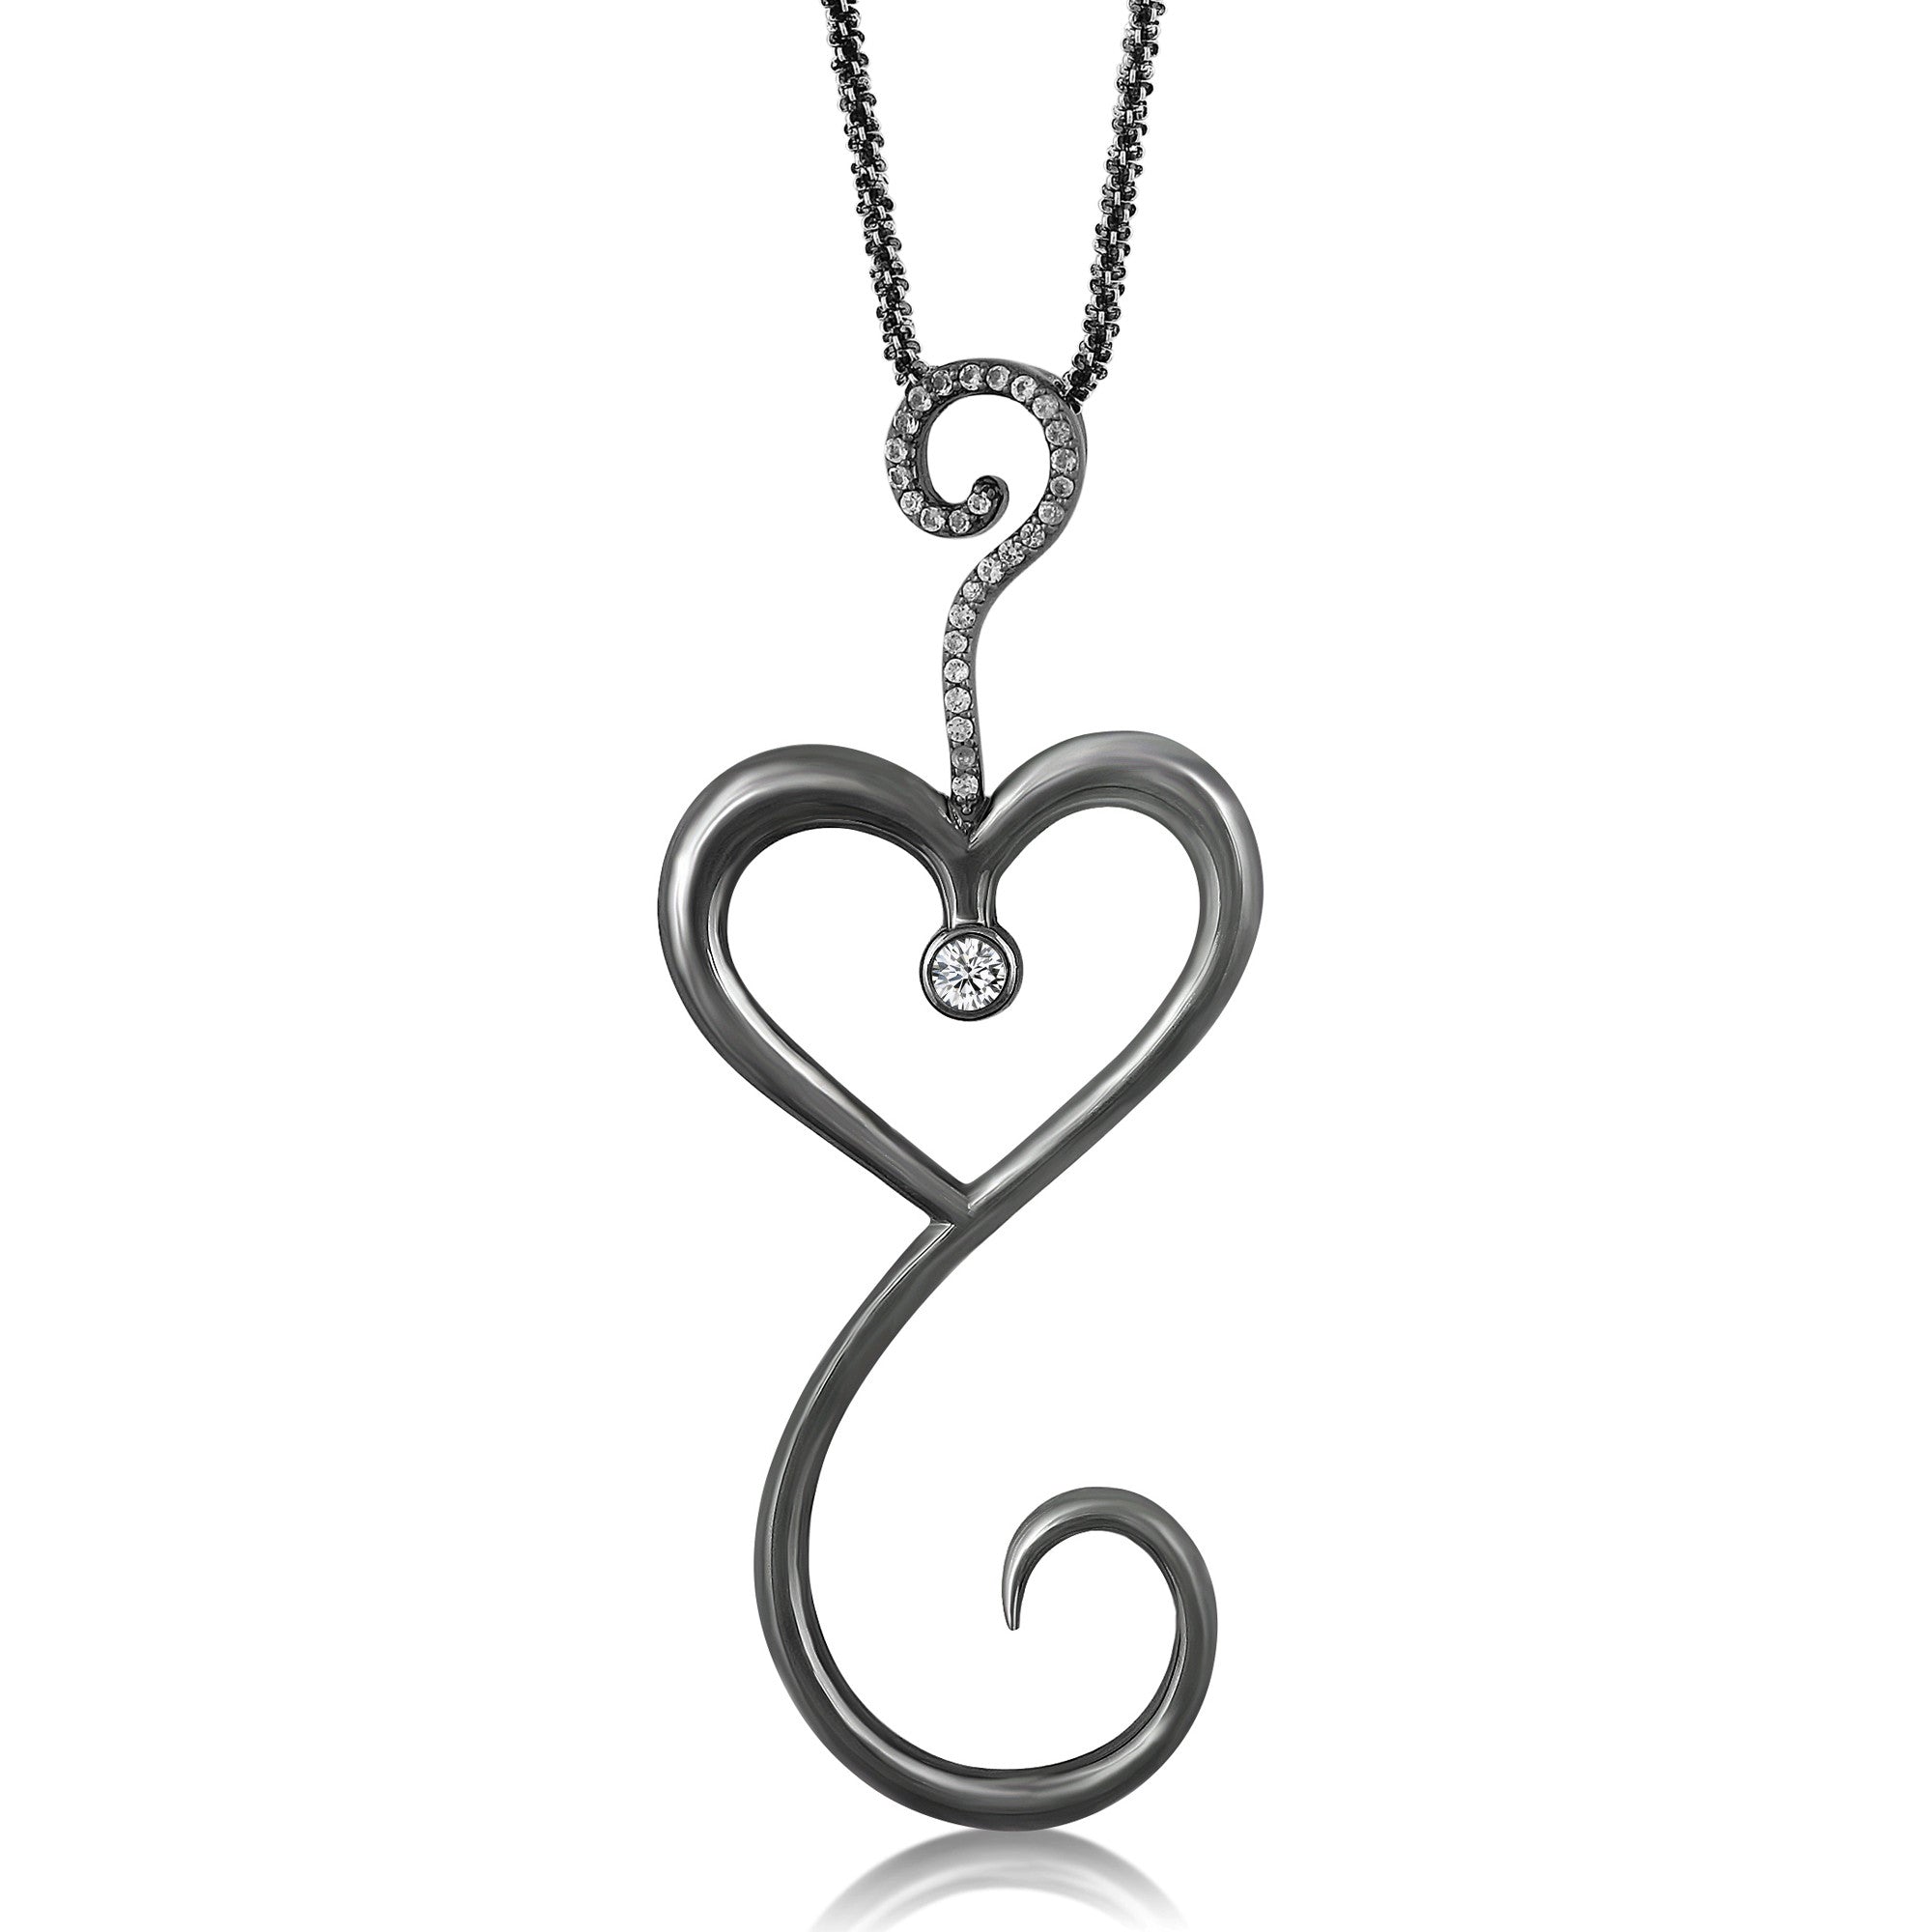 Intrikit Heart -Solid Sterling Silver .925 with a Black Rhodium finish and a White Topaz Pave and 3mm Sapphire Center Stone